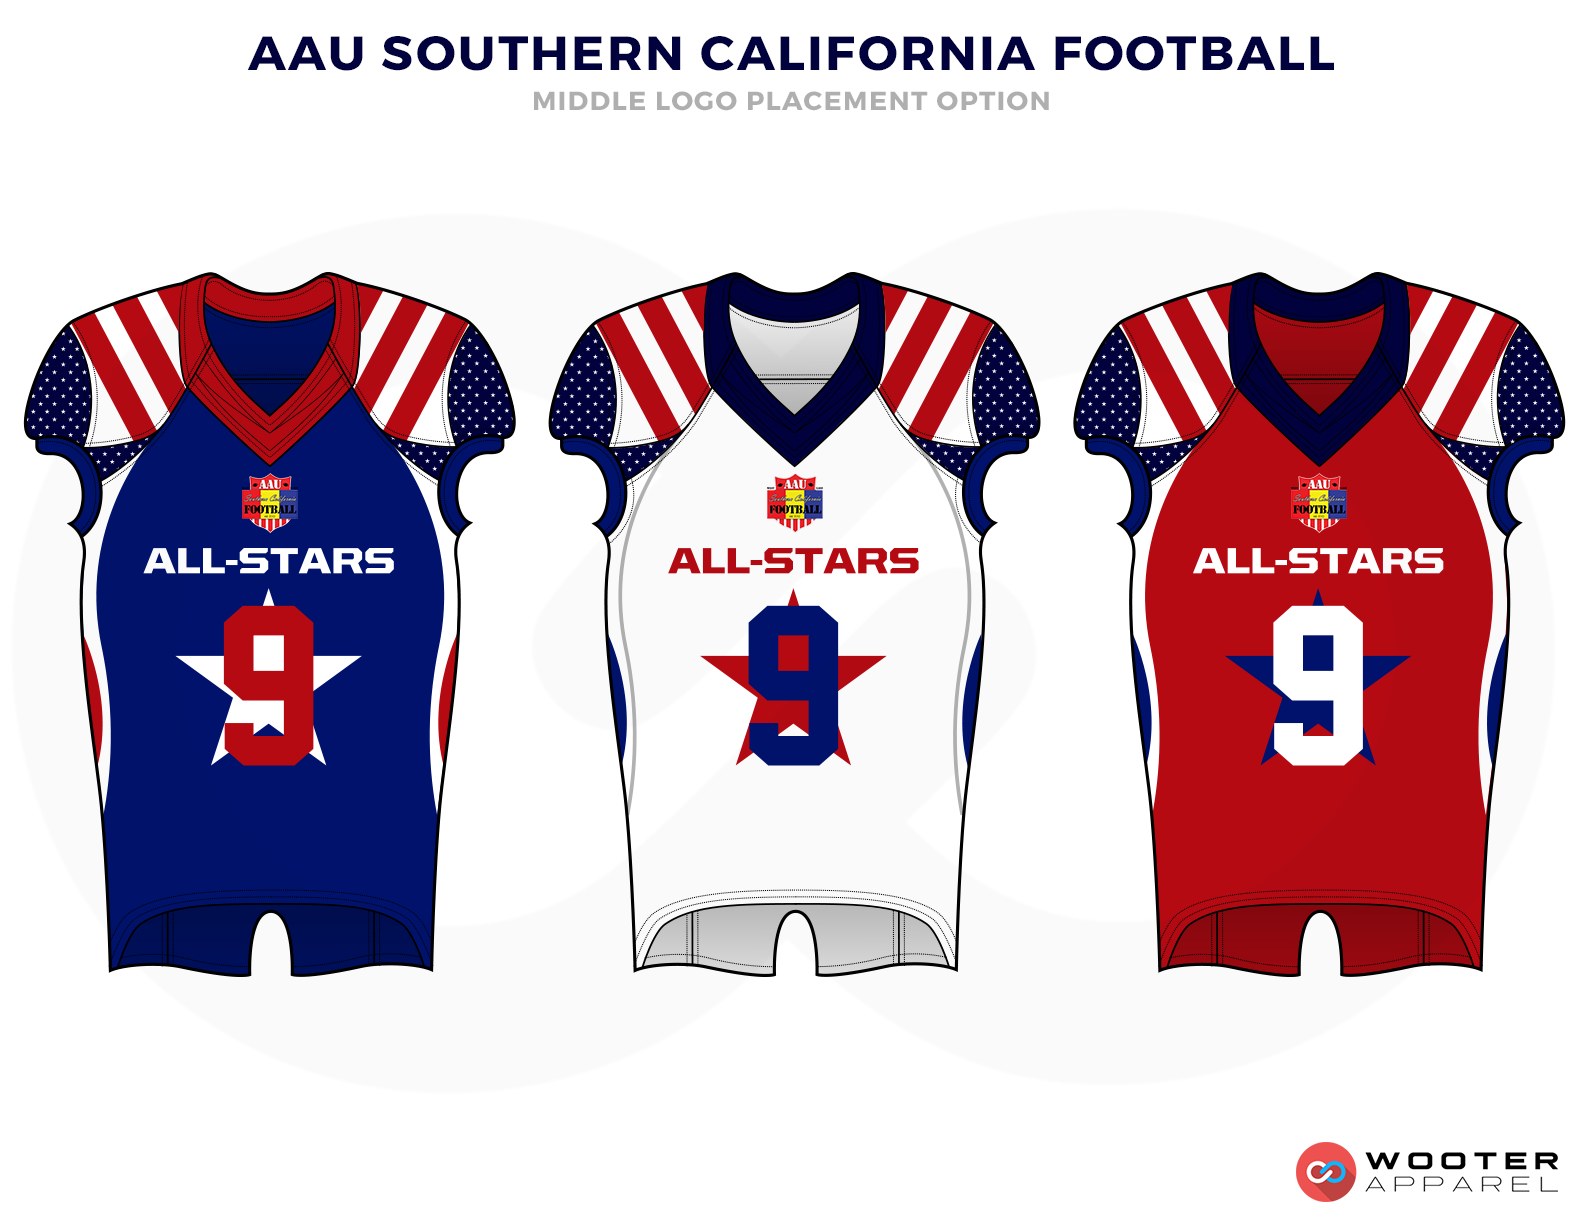 Youth Football Uniforms Custom Uniforms Wooter Apparel